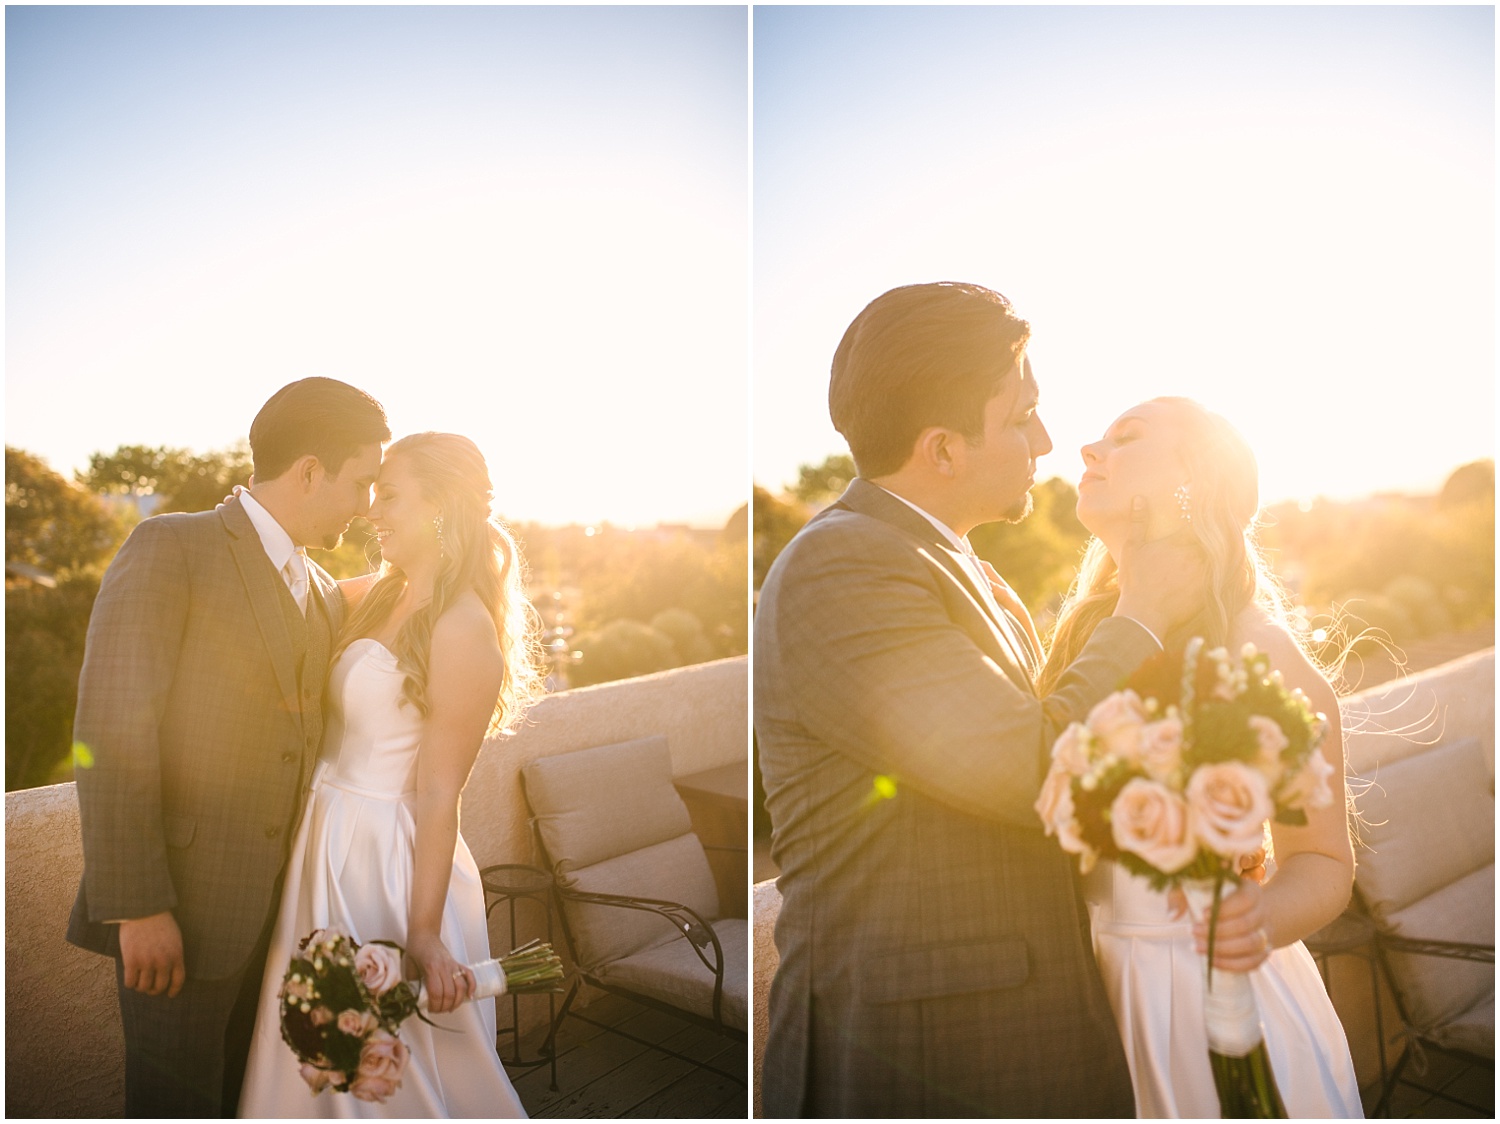 Bride and groom kissing on the balcony in the golden sunlight | Albuquerque wedding photographer